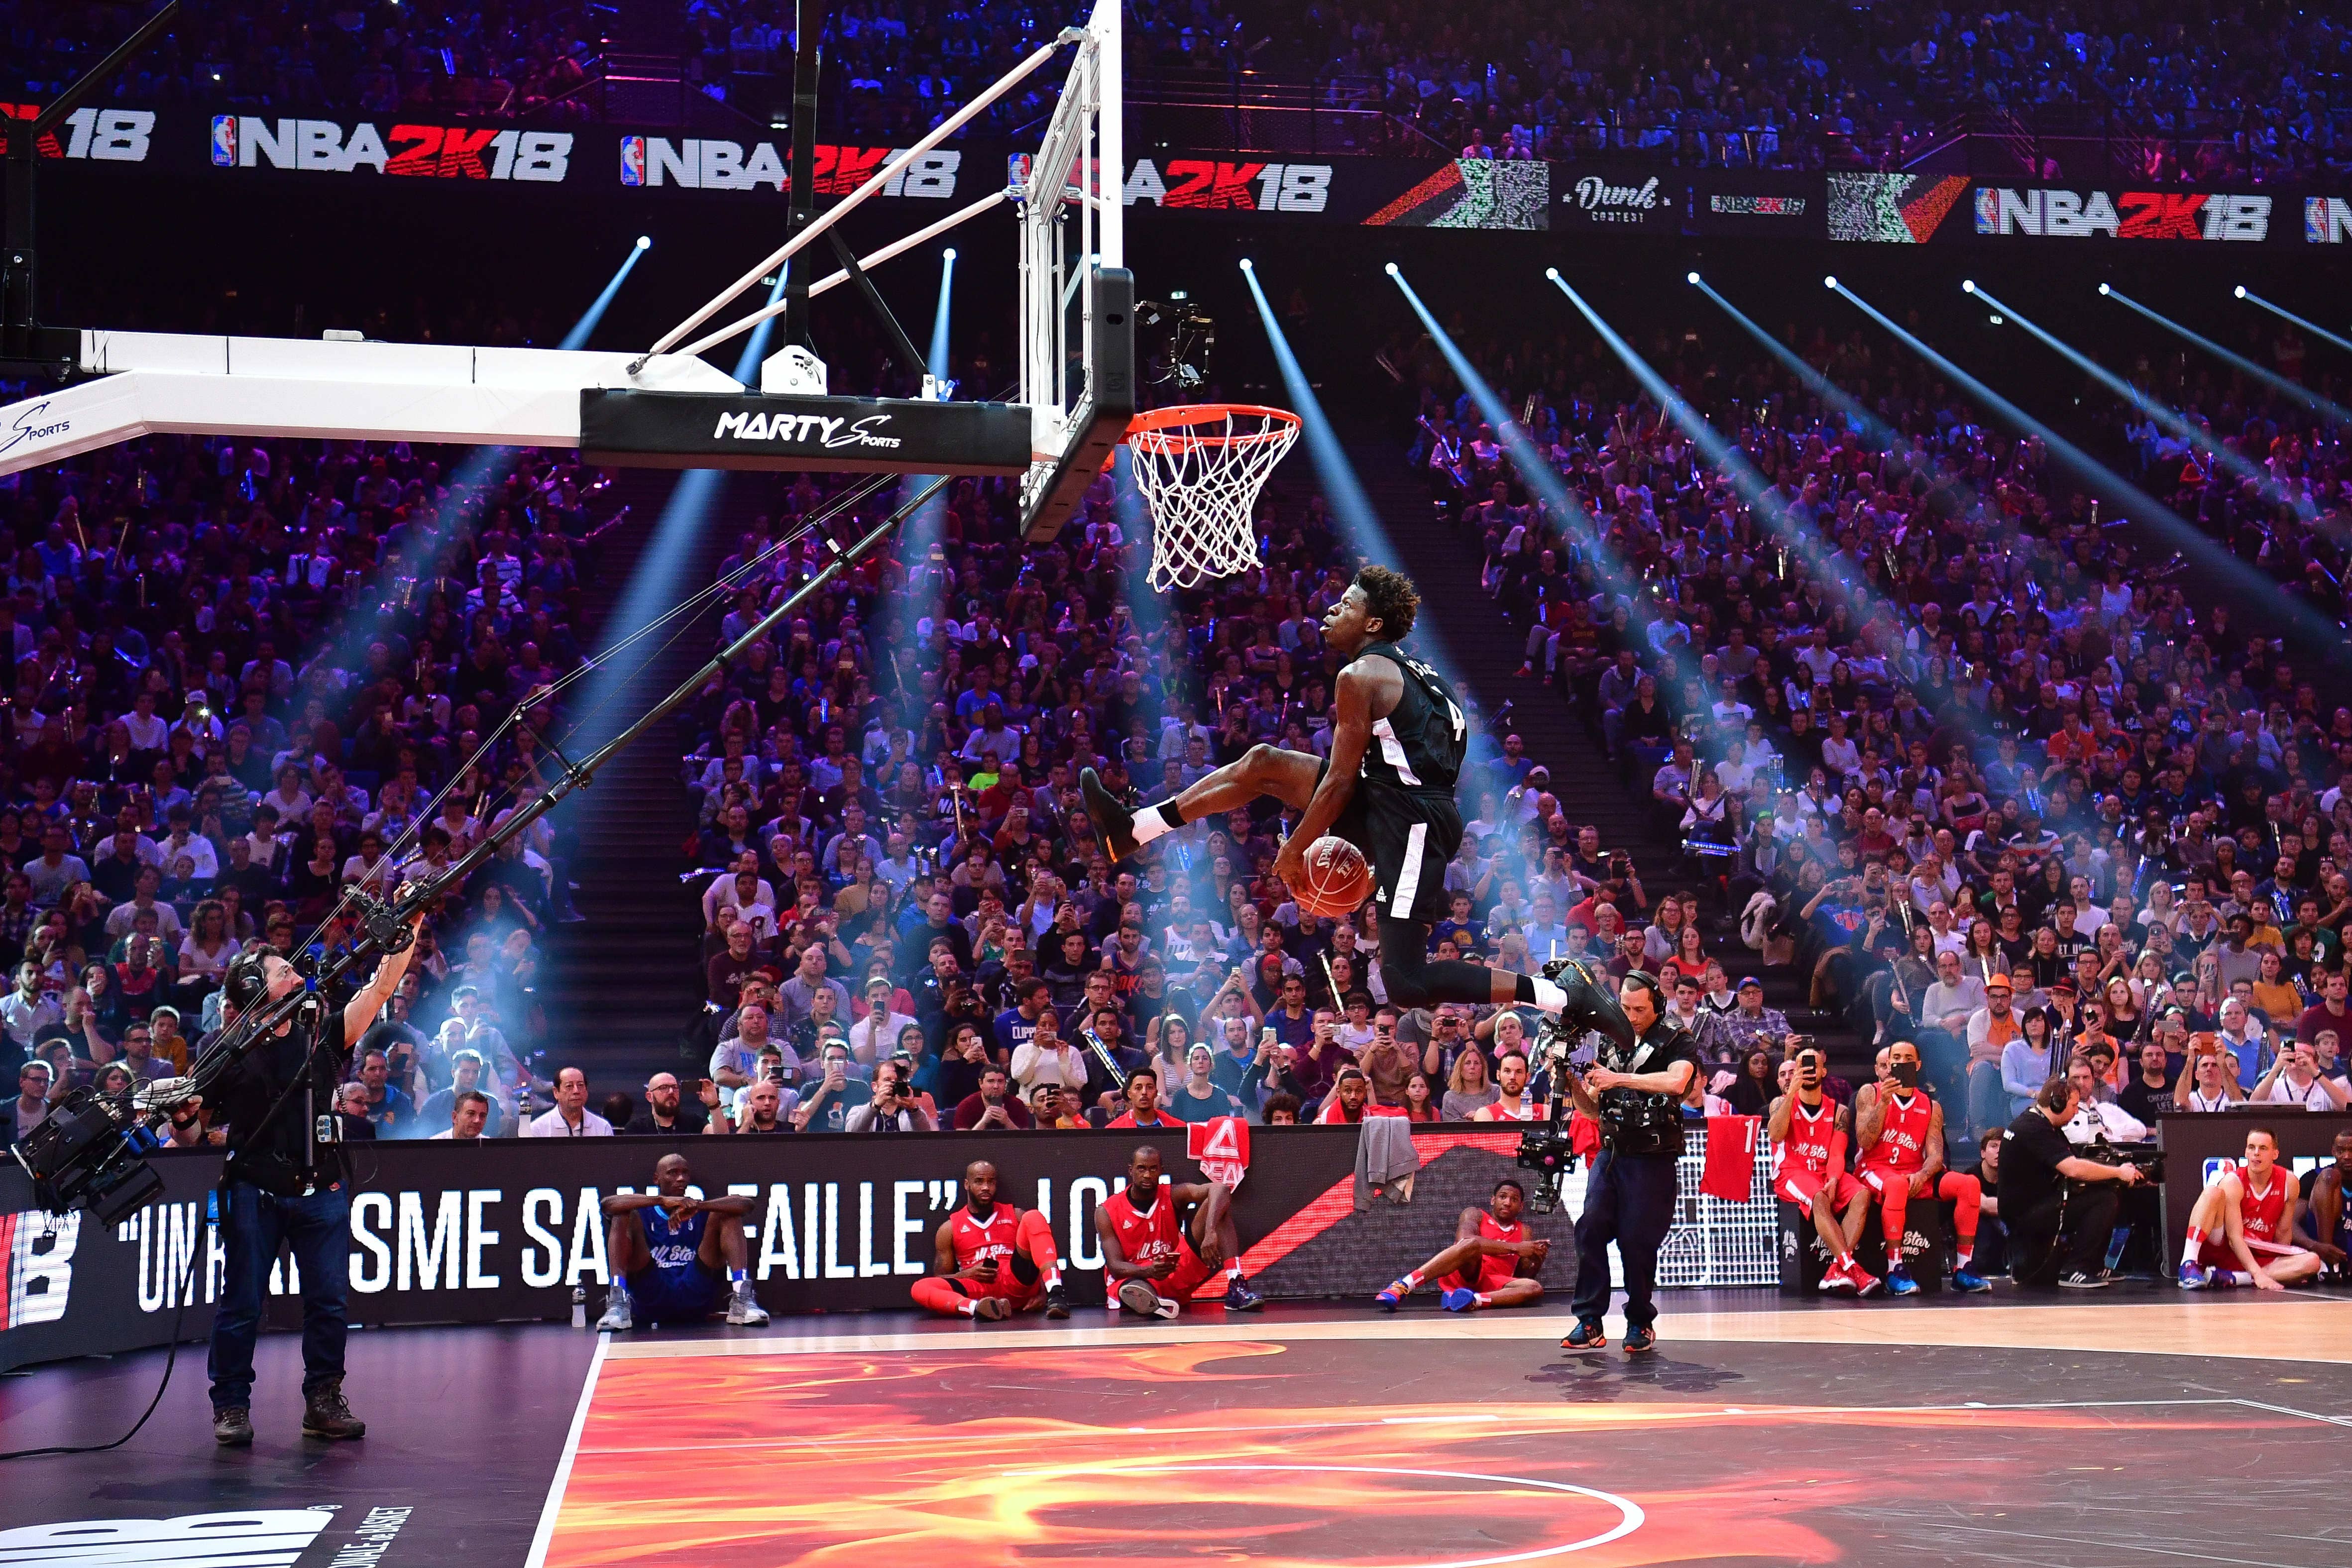 Sylvain Francisco competing in the NBA2K18 Dunk Contest during the All Star Game.